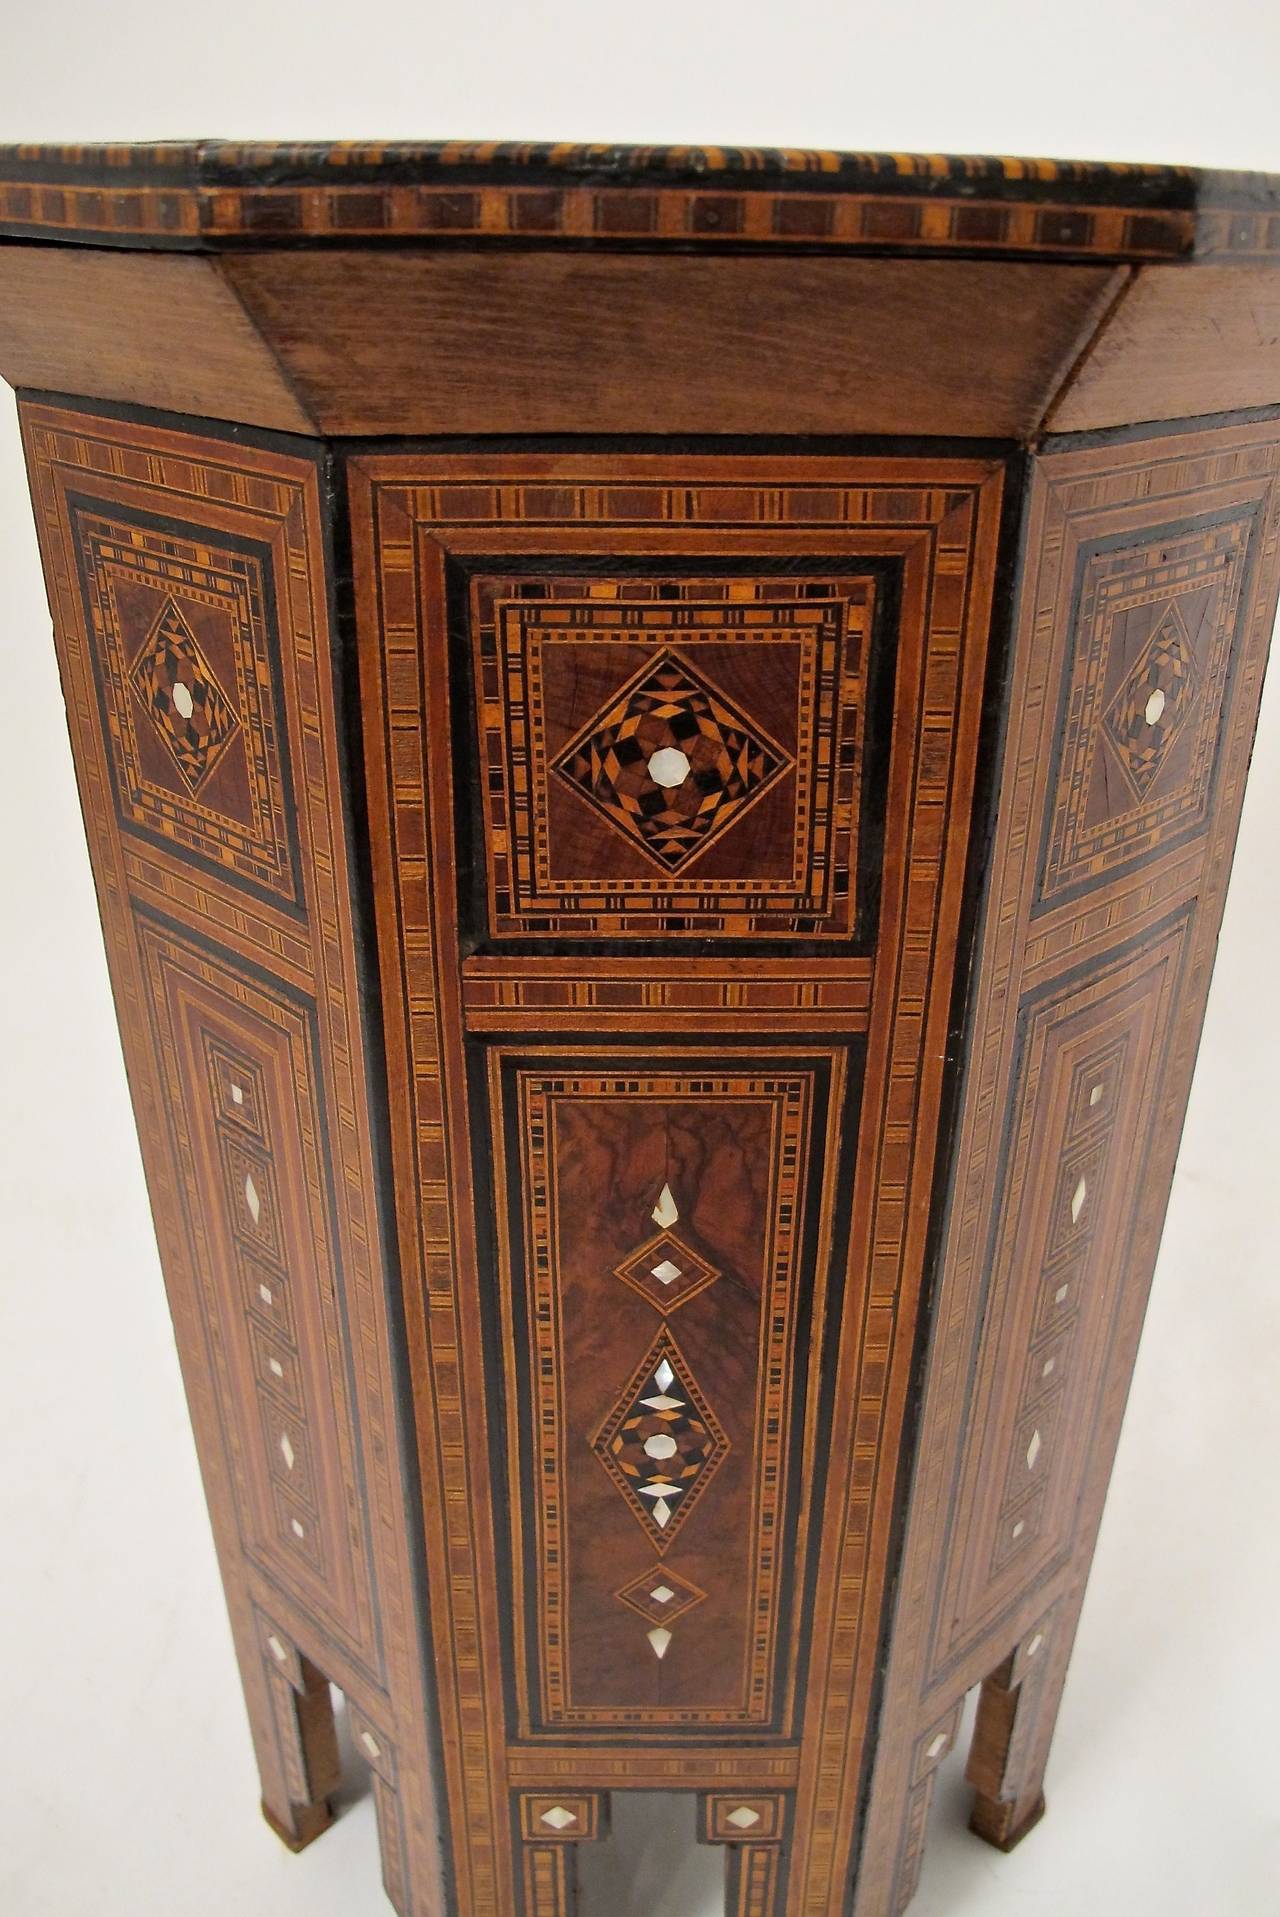 Wood Syrian Inlaid Tabouret Side Table